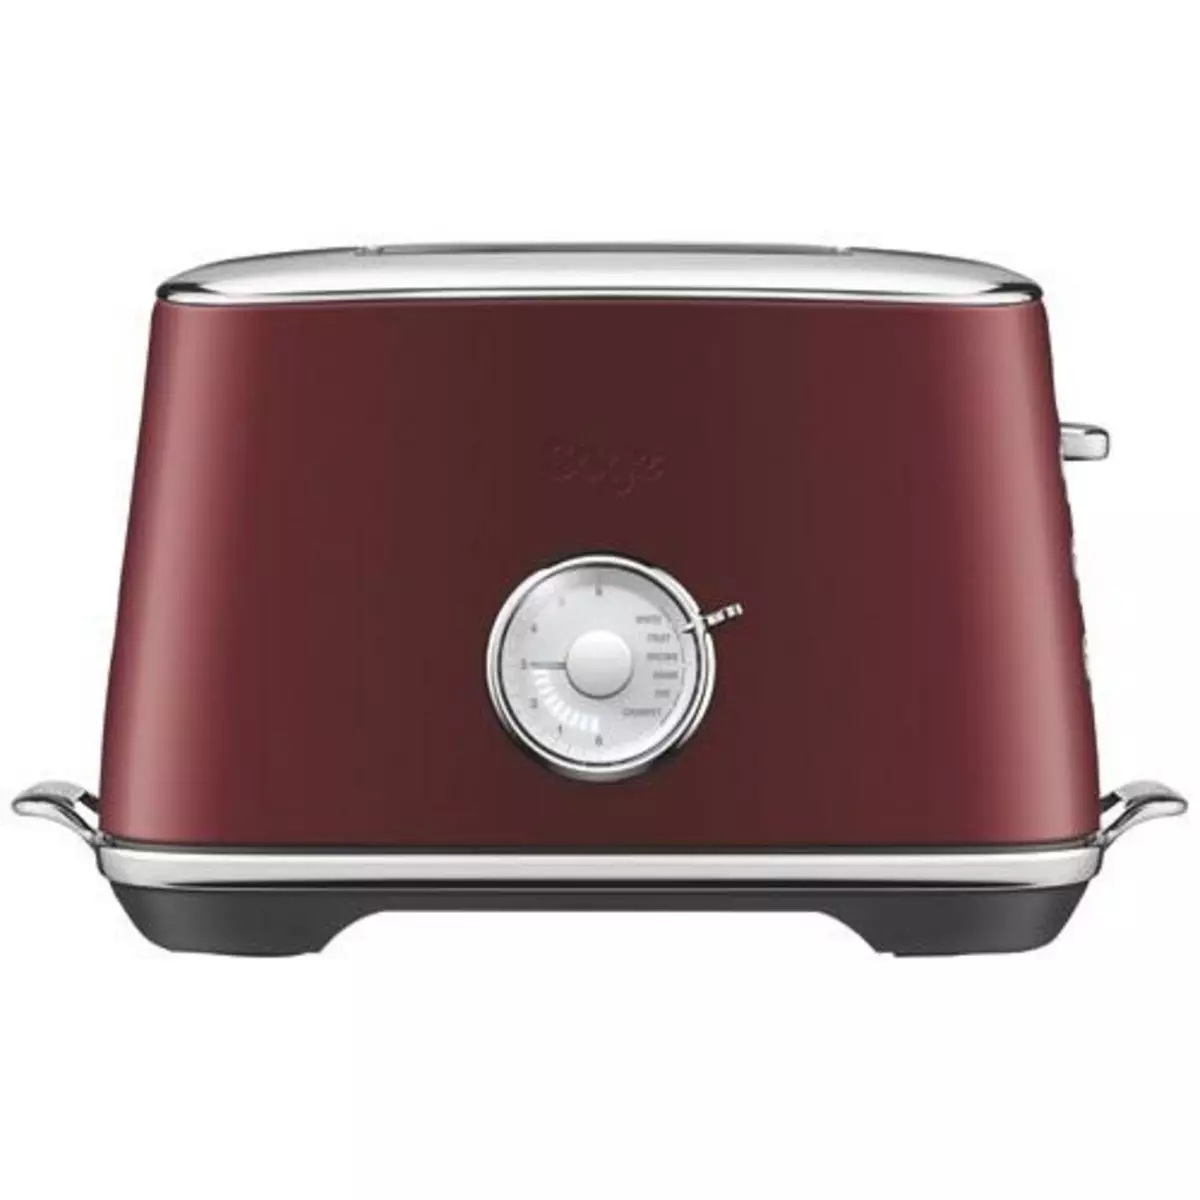 SAGE Grille-pains 2 fentes 1000w select luxe rouge velours - STA735RVC4EEU1